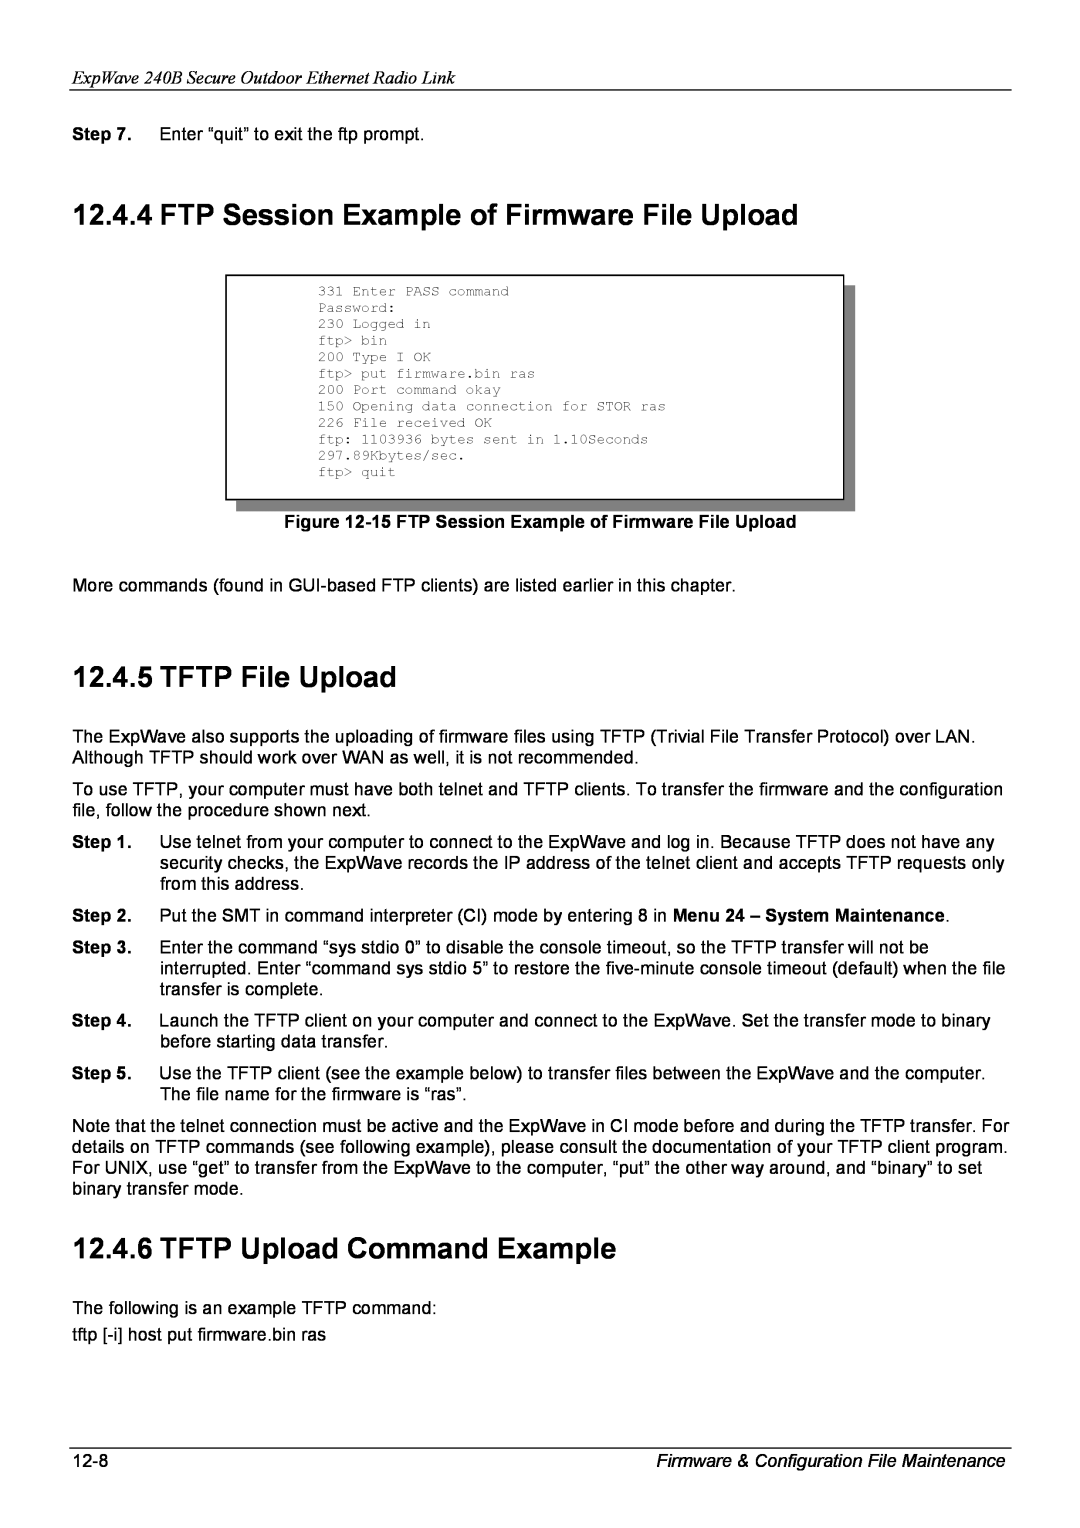 ZyXEL Communications 240B manual FTP Session Example of Firmware File Upload, TFTP File Upload, TFTP Upload Command Example 